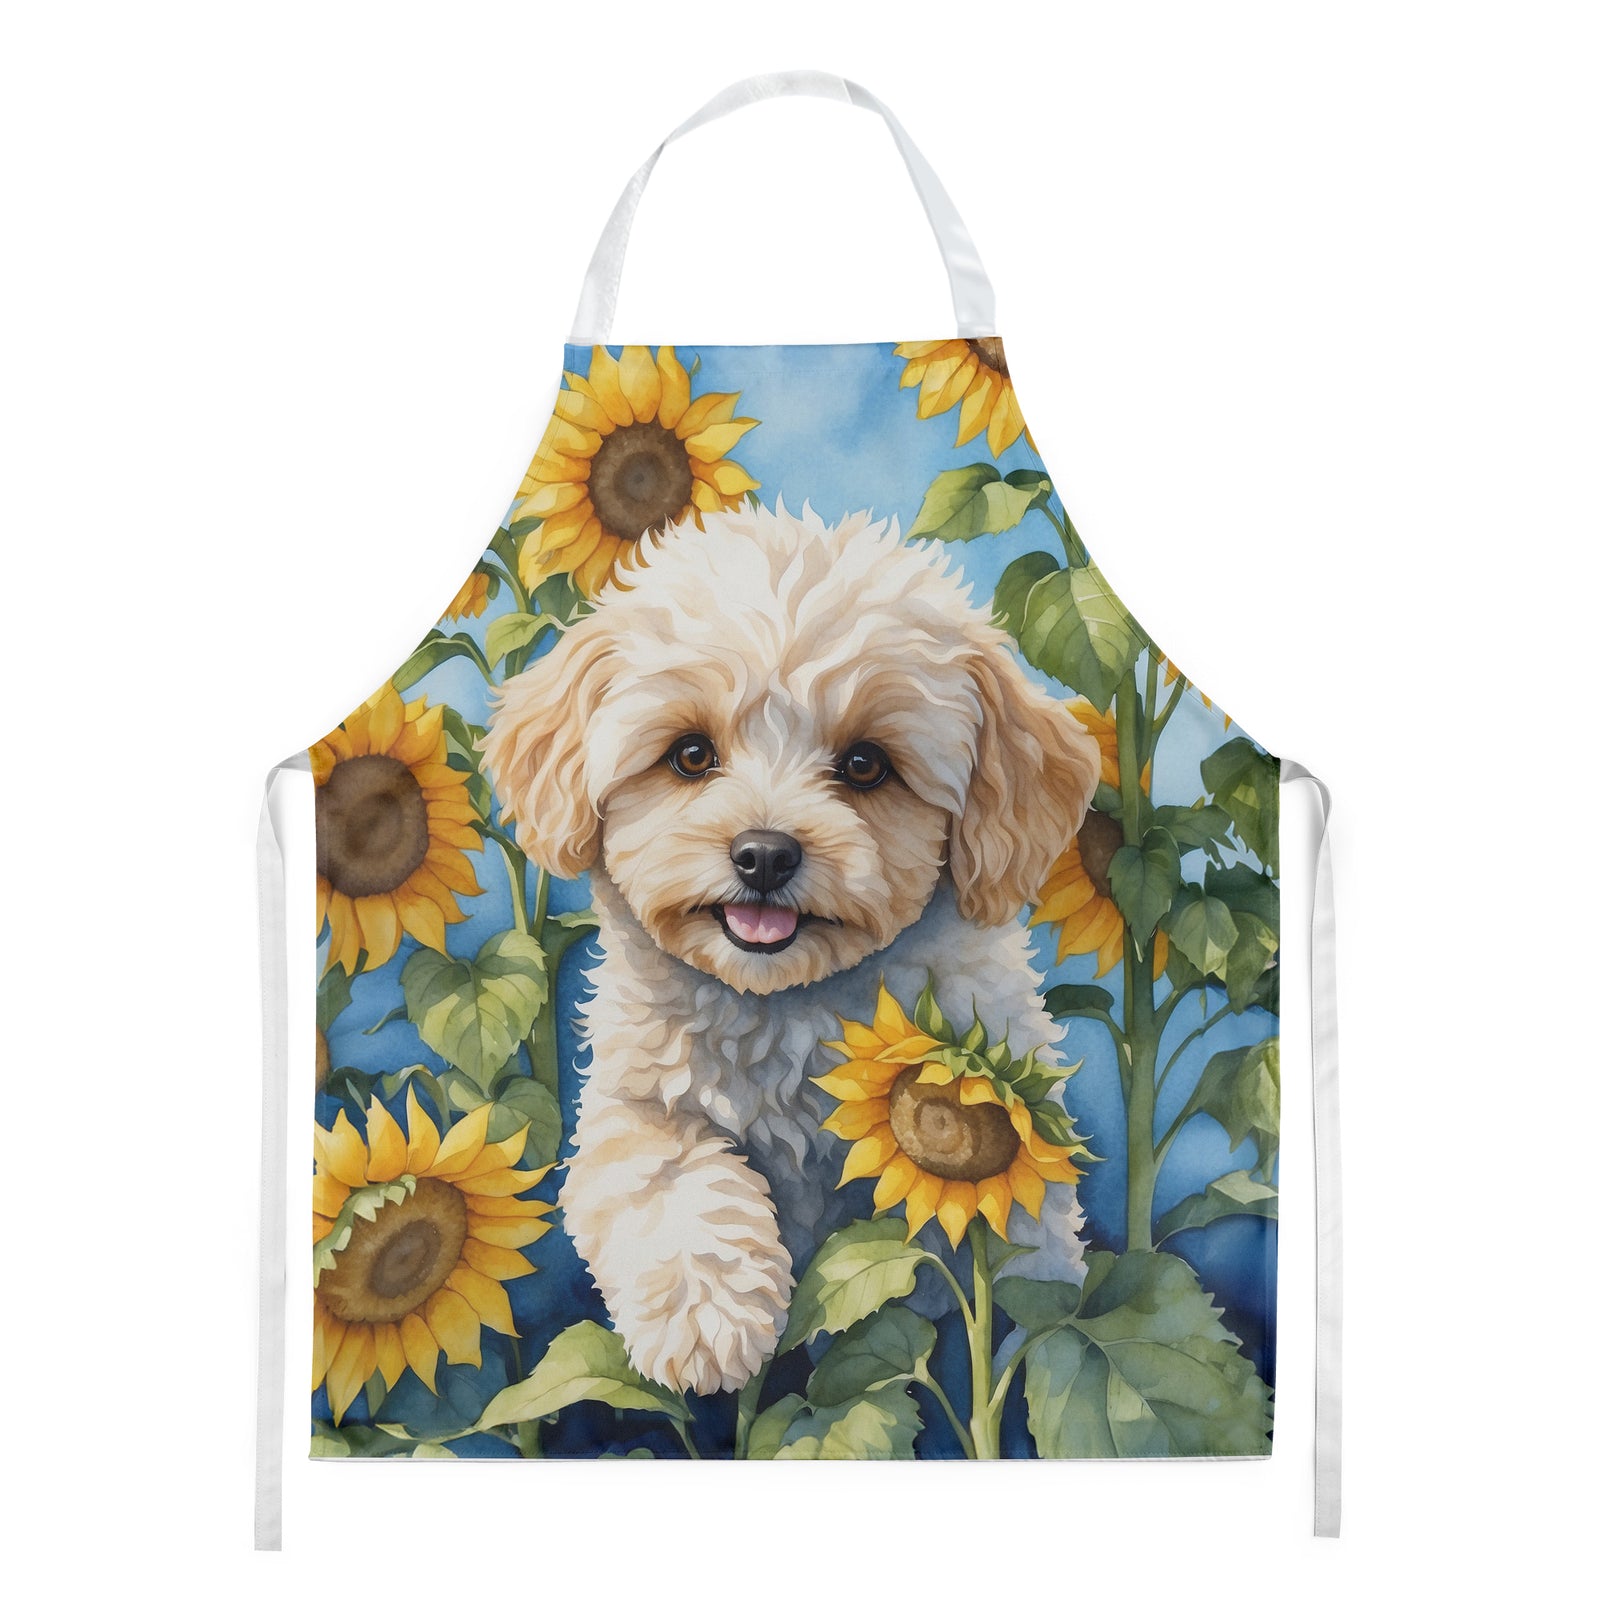 Buy this Maltipoo in Sunflowers Apron